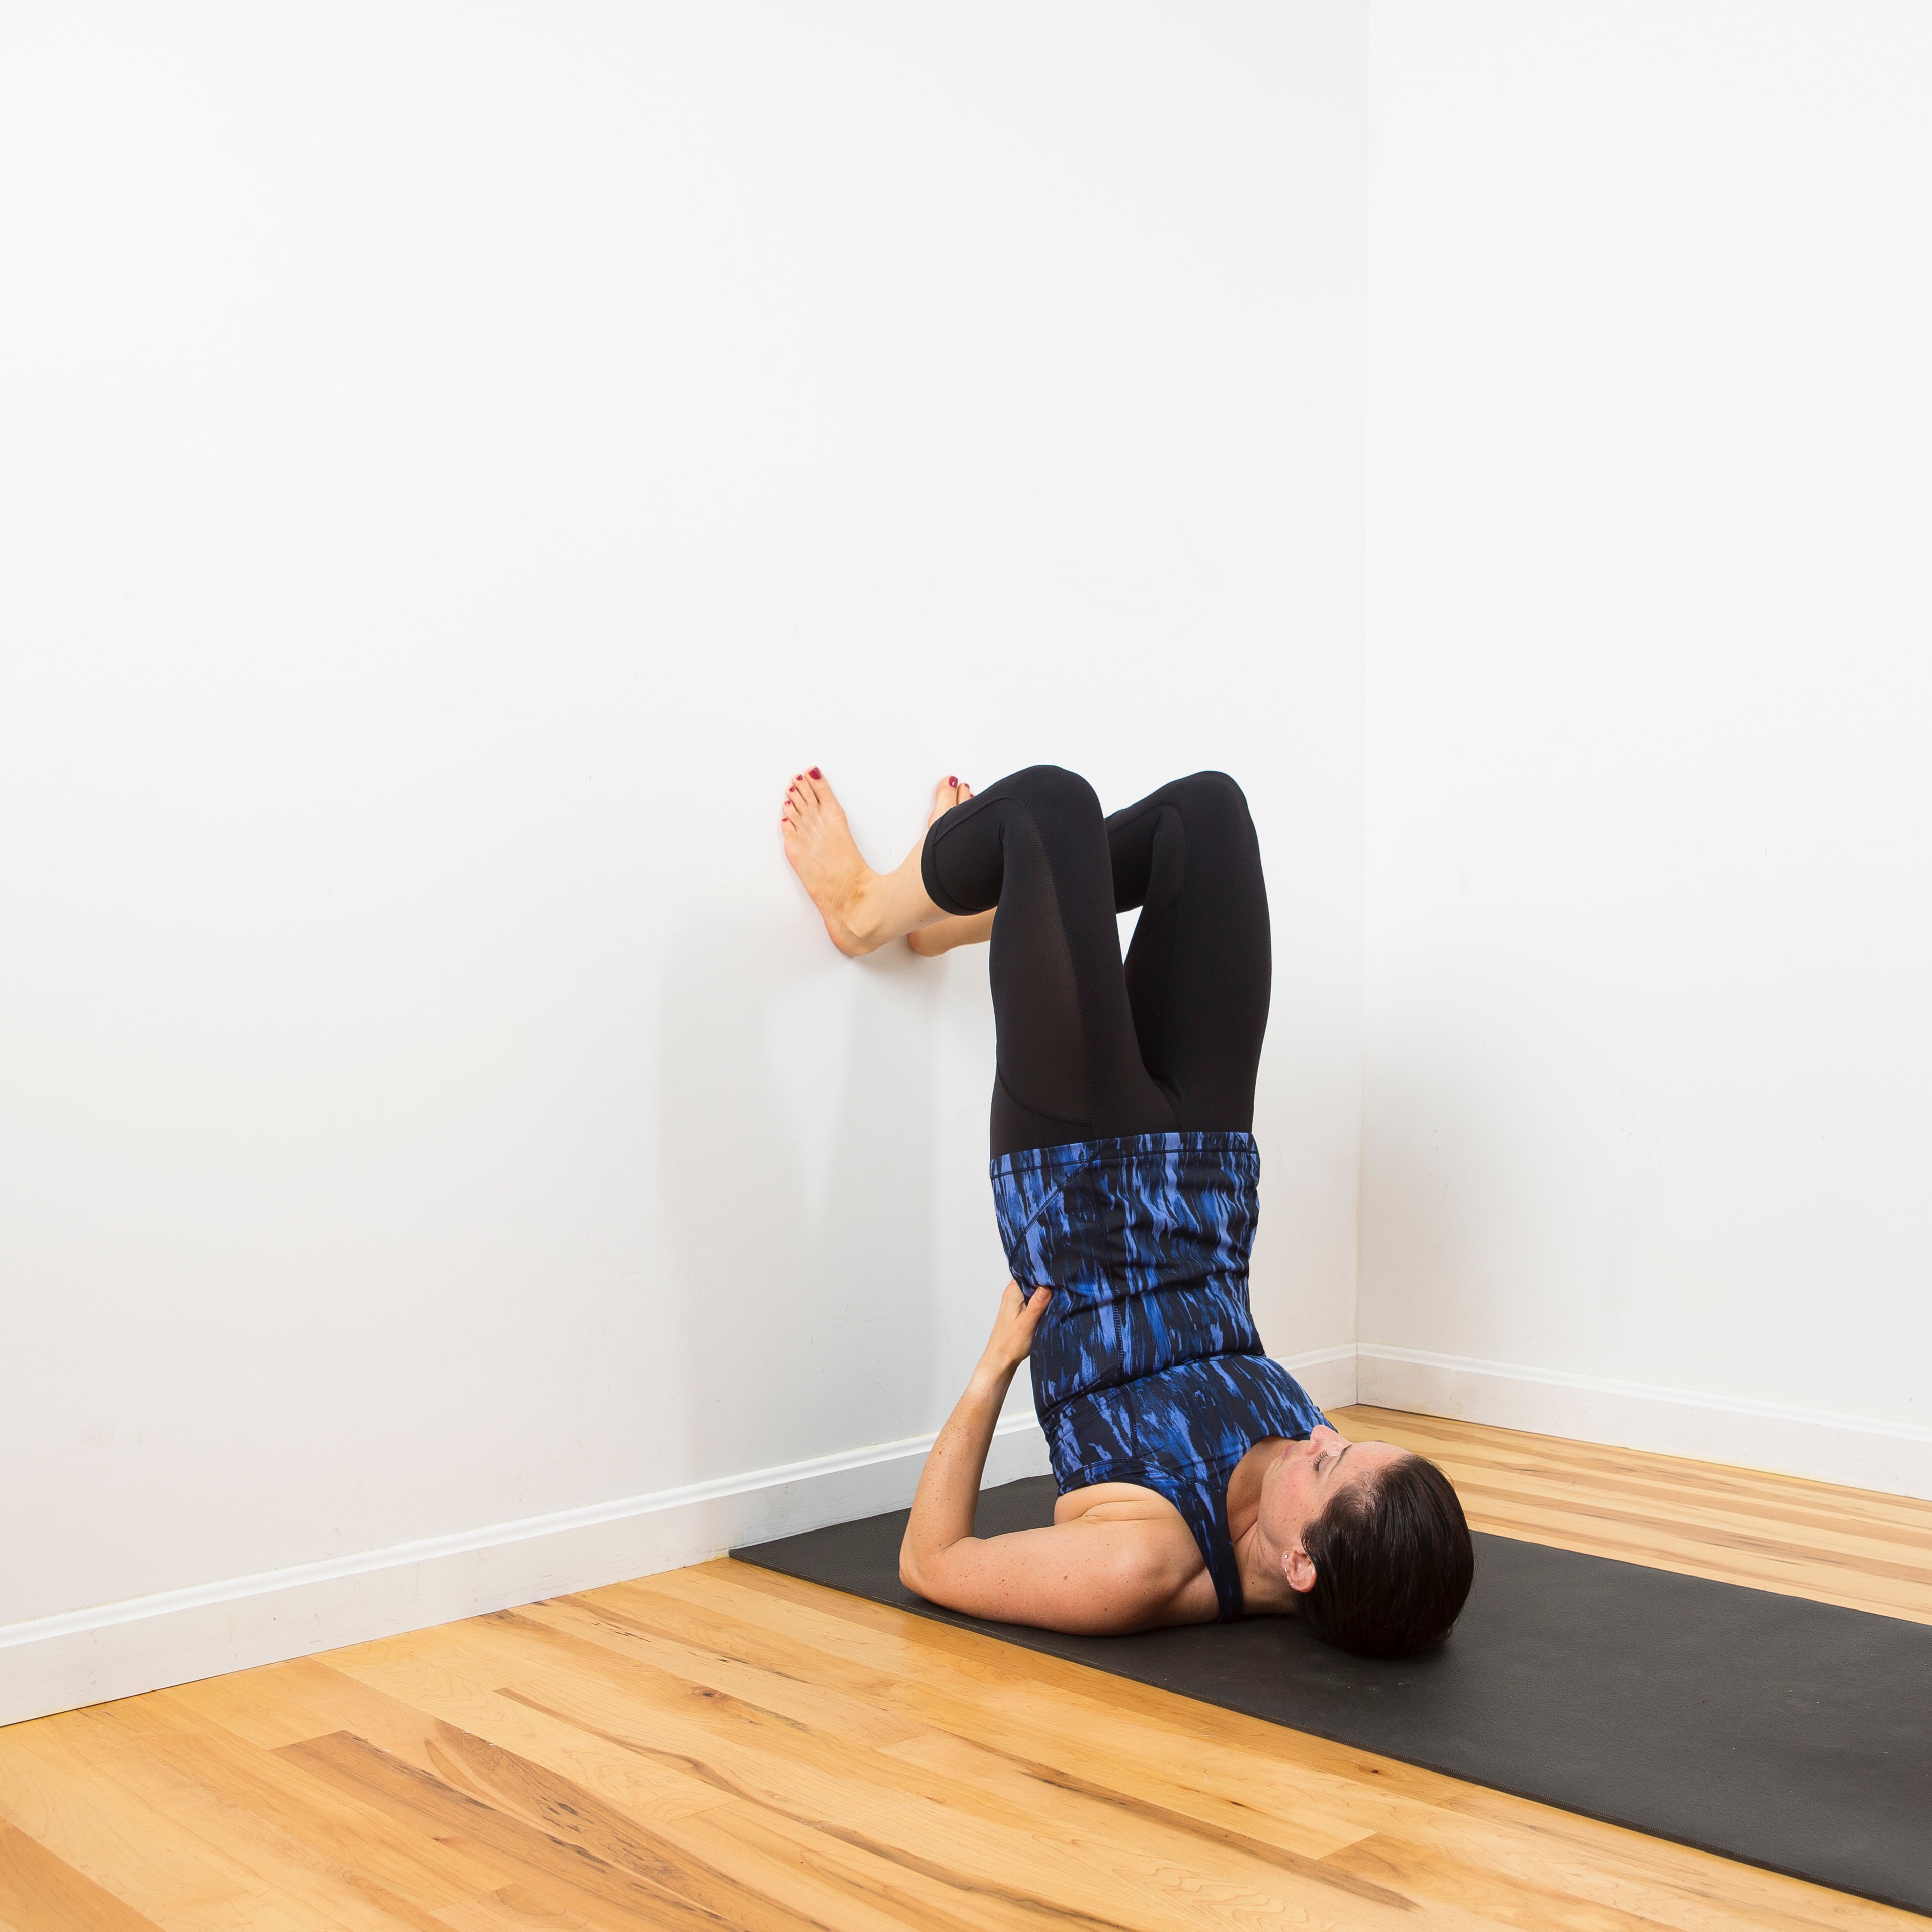 Wall Yoga Exercises: Why Practice Yoga at the Wall? - YogaUOnline